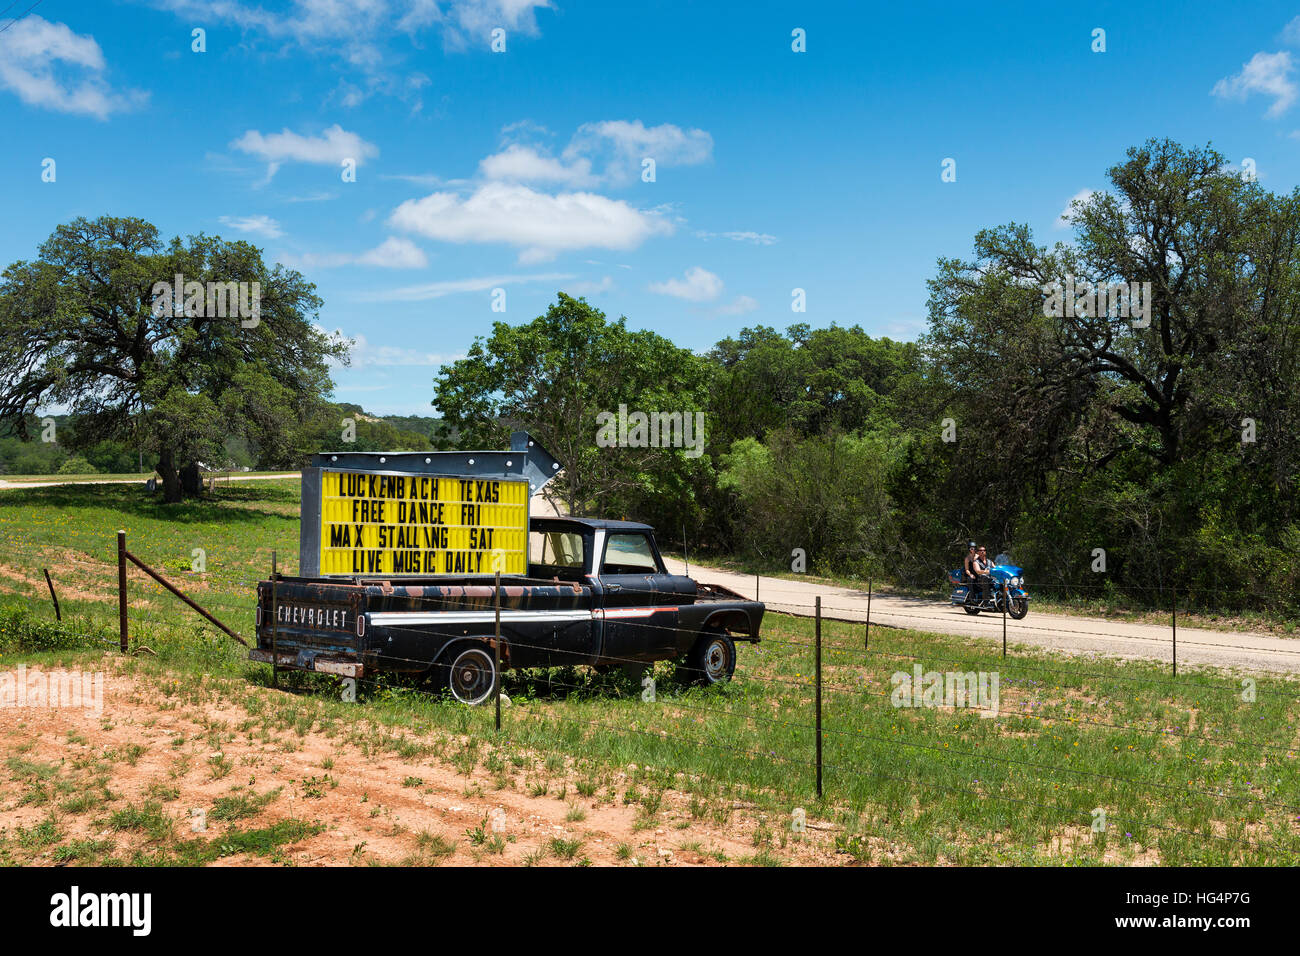 Luckenbach, Texas, USA - June 8, 2014: Couple in a motorbike passing by a truck with a sign for a music event in Luckenback, Texas. Stock Photo